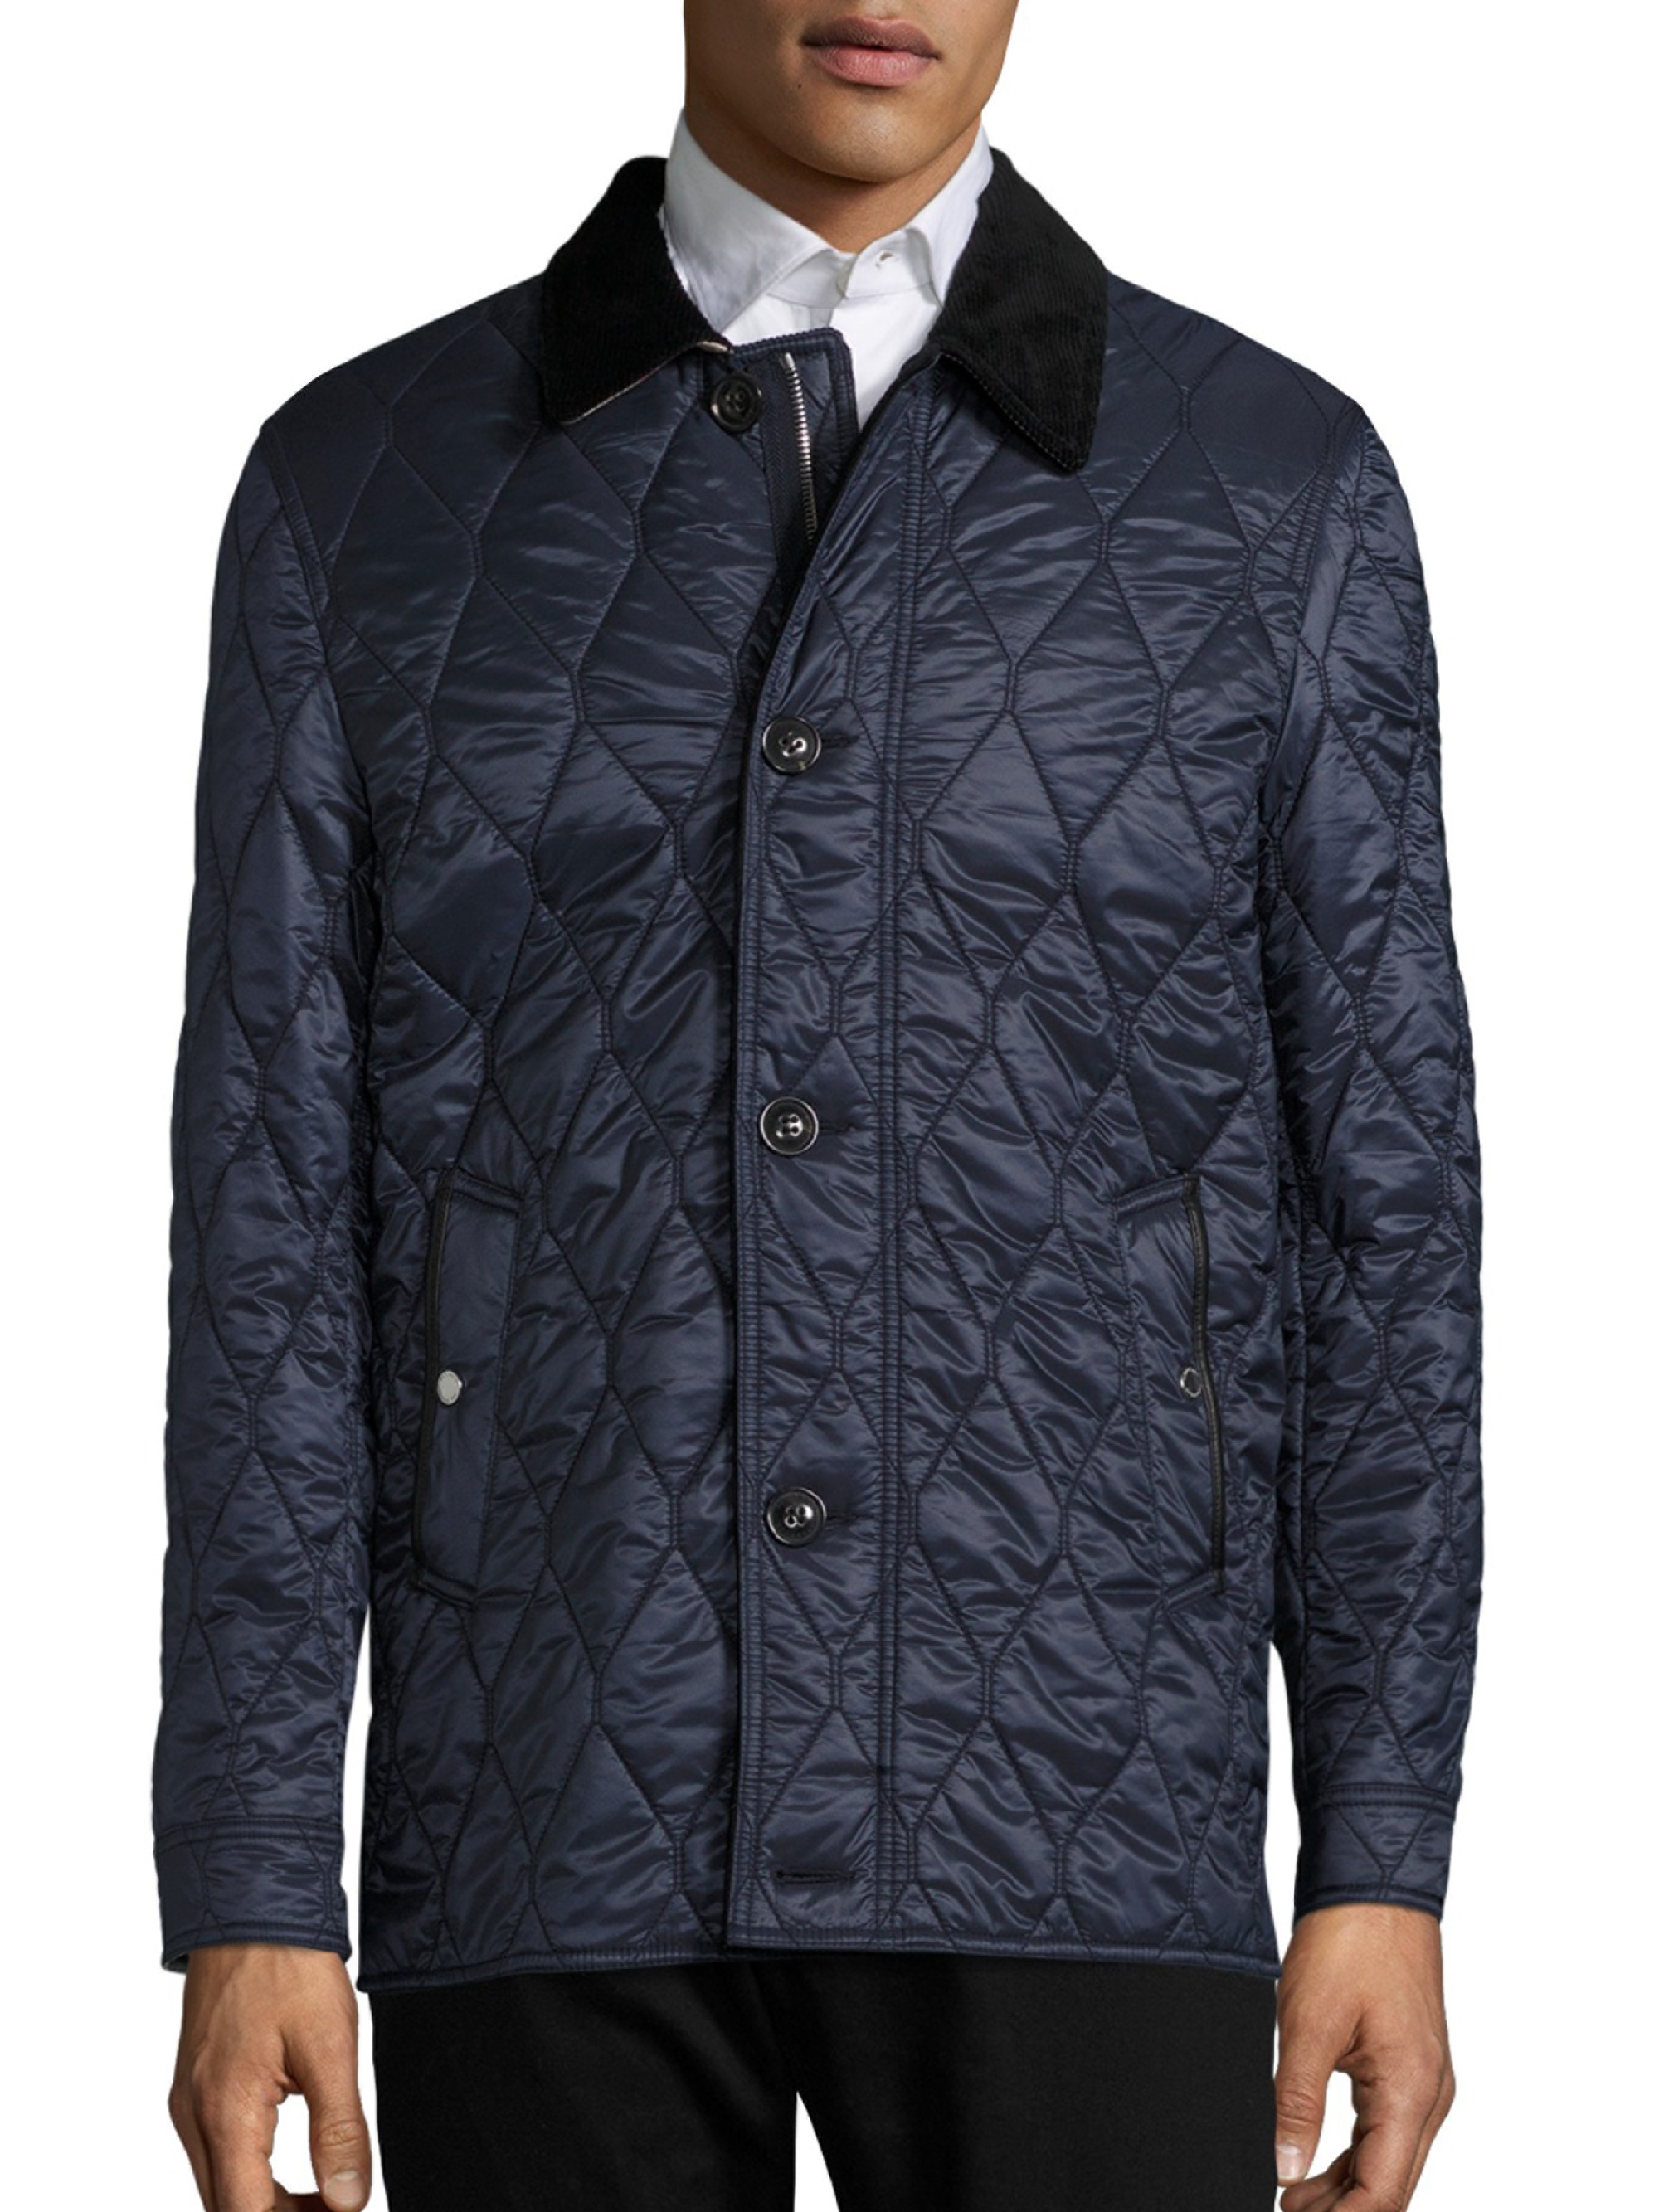 burberry quilted jacket navy